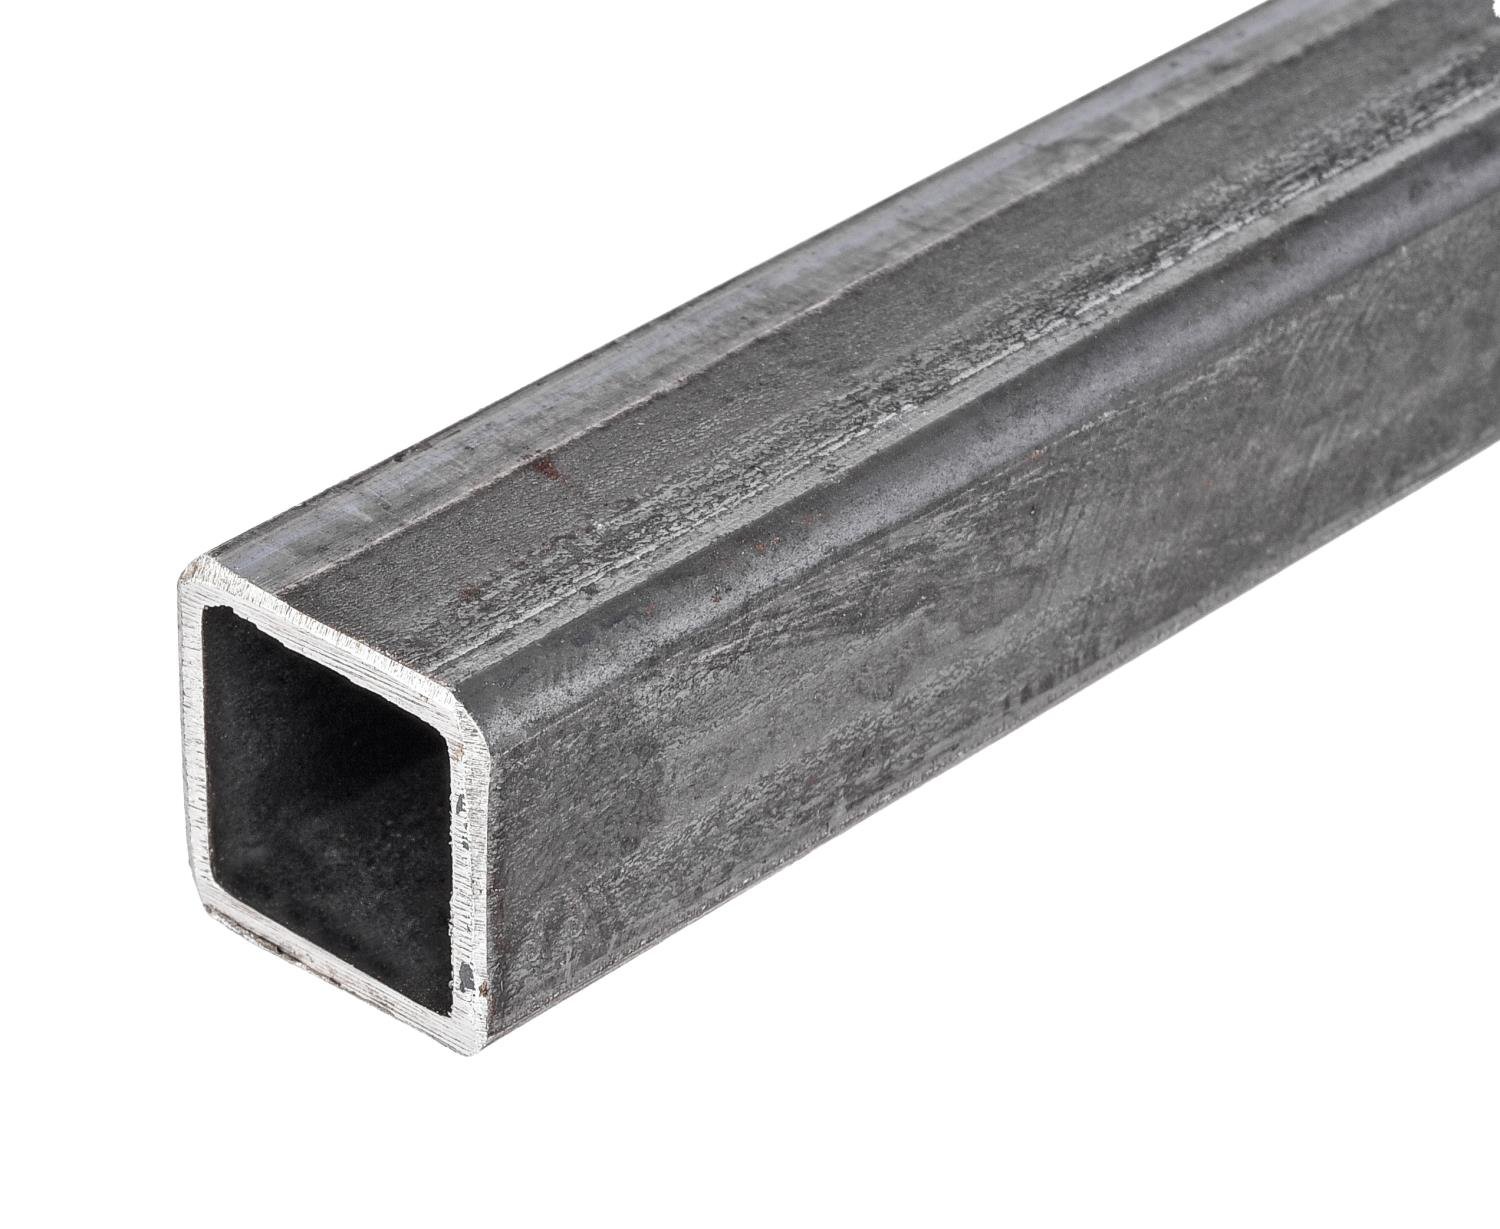 Mild Steel Tubing [Square, 3/4 in. Width x 0.065 in. Thickness x 4 ft. Length]